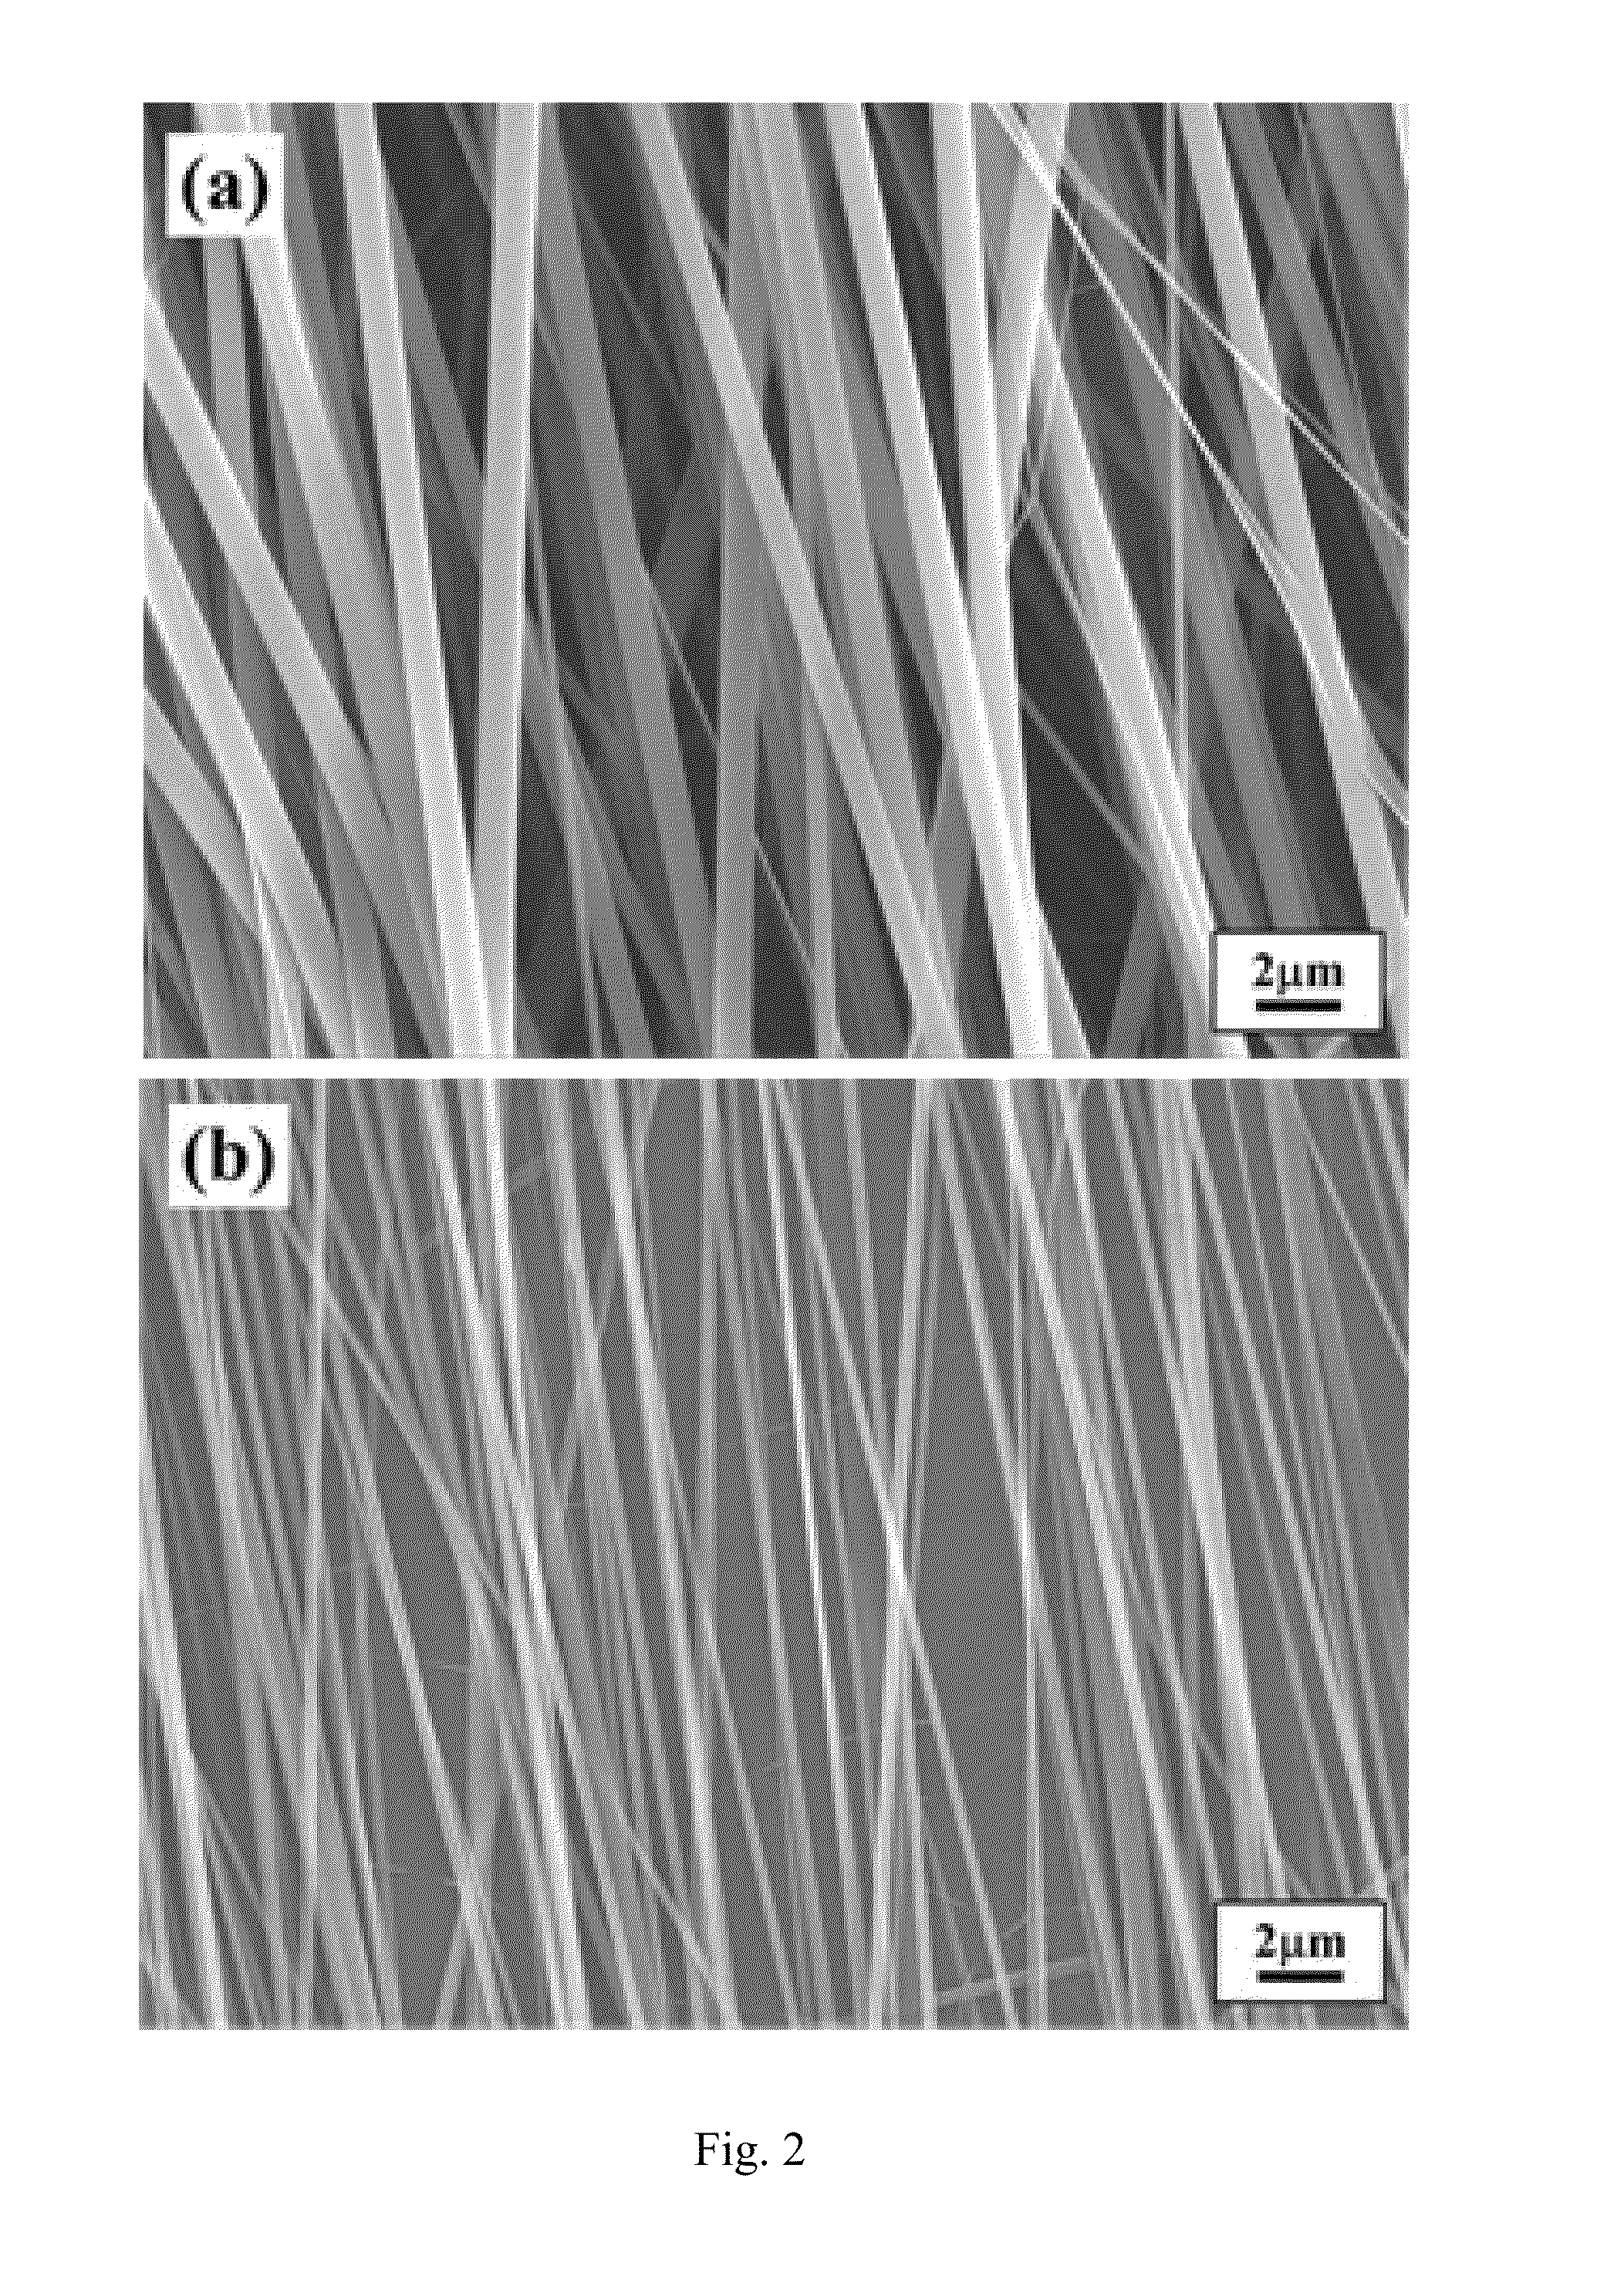 Nanofiber and photovoltaic device comprising patterned nanofiber